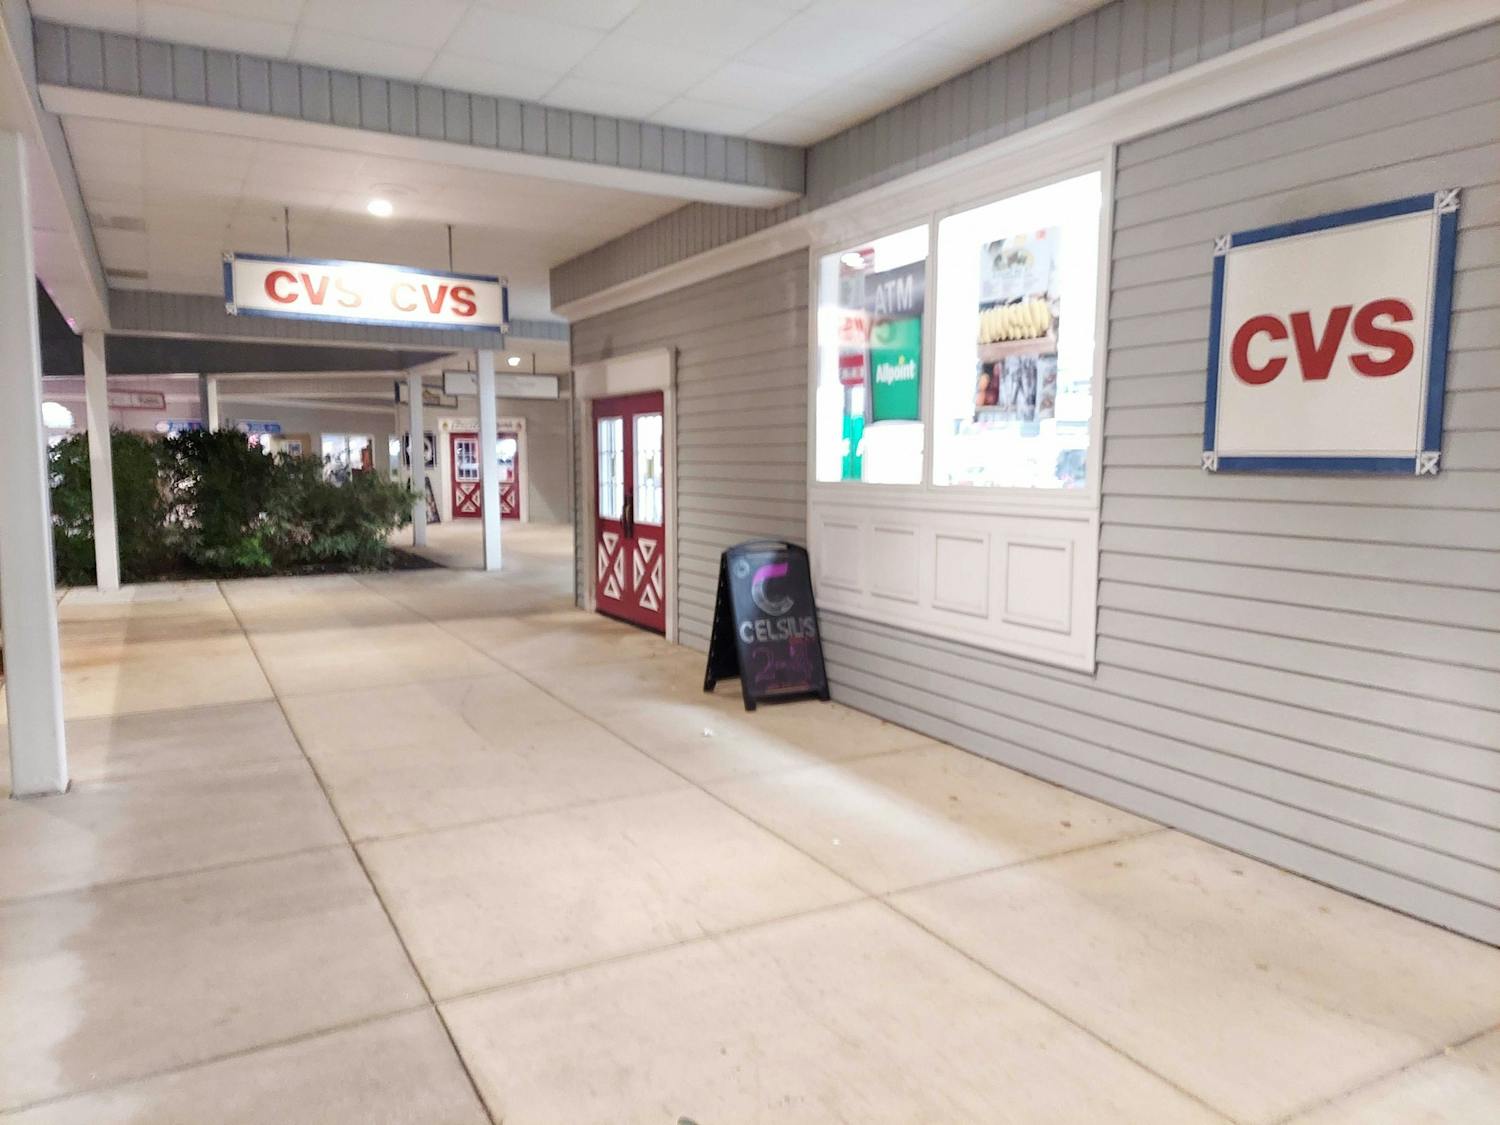 The CVS located in The Commons may close in January, according to people with knowledge of the situation.